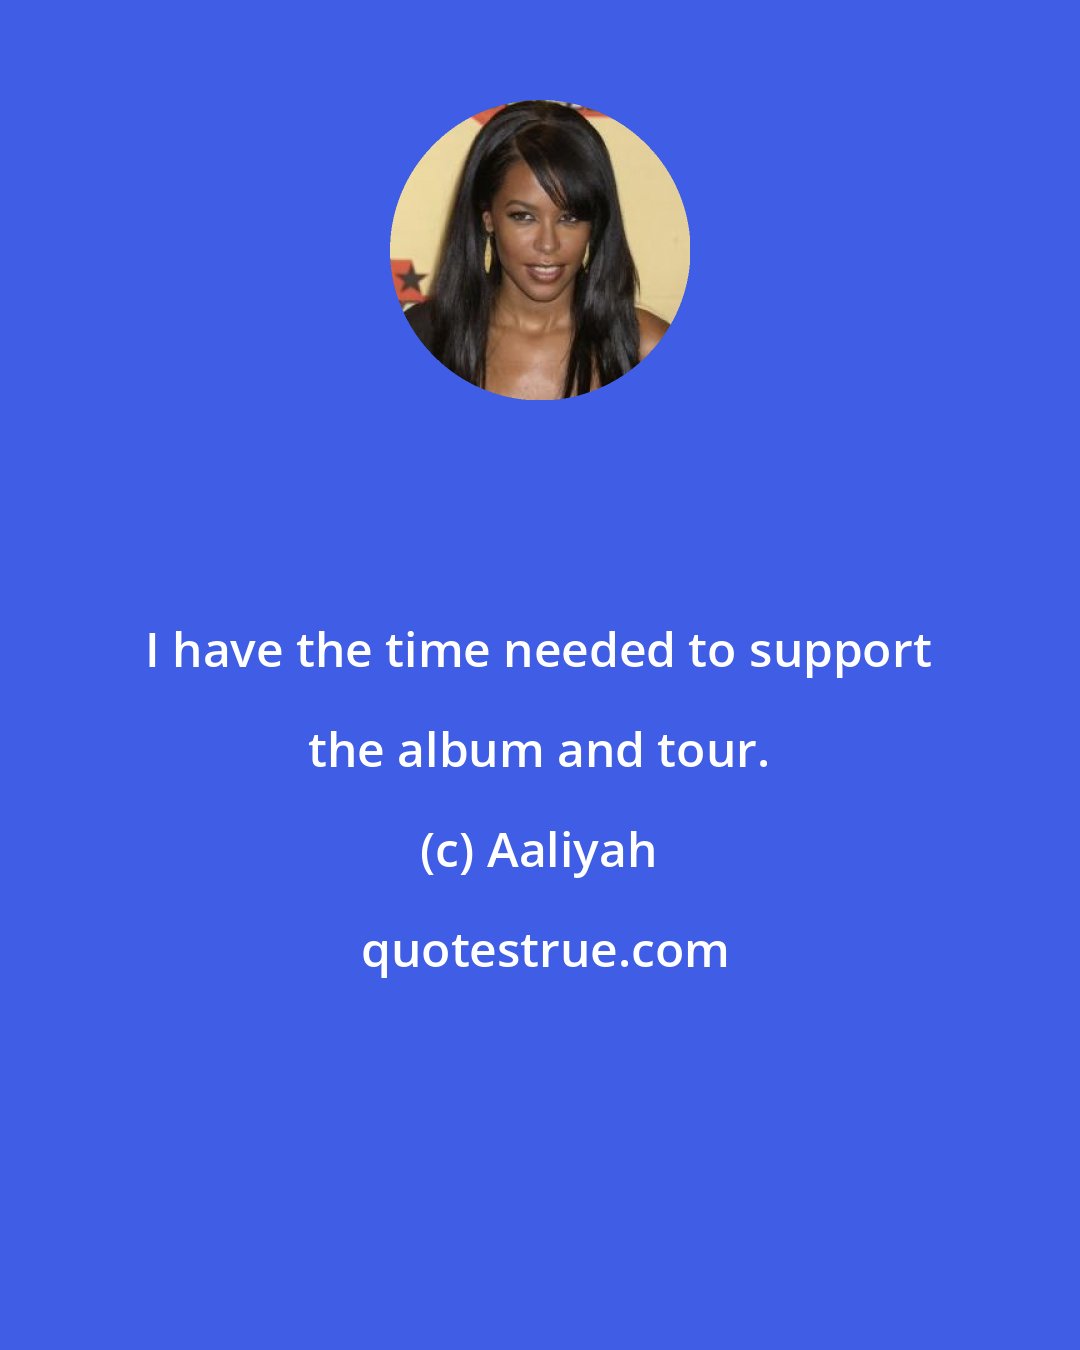 Aaliyah: I have the time needed to support the album and tour.